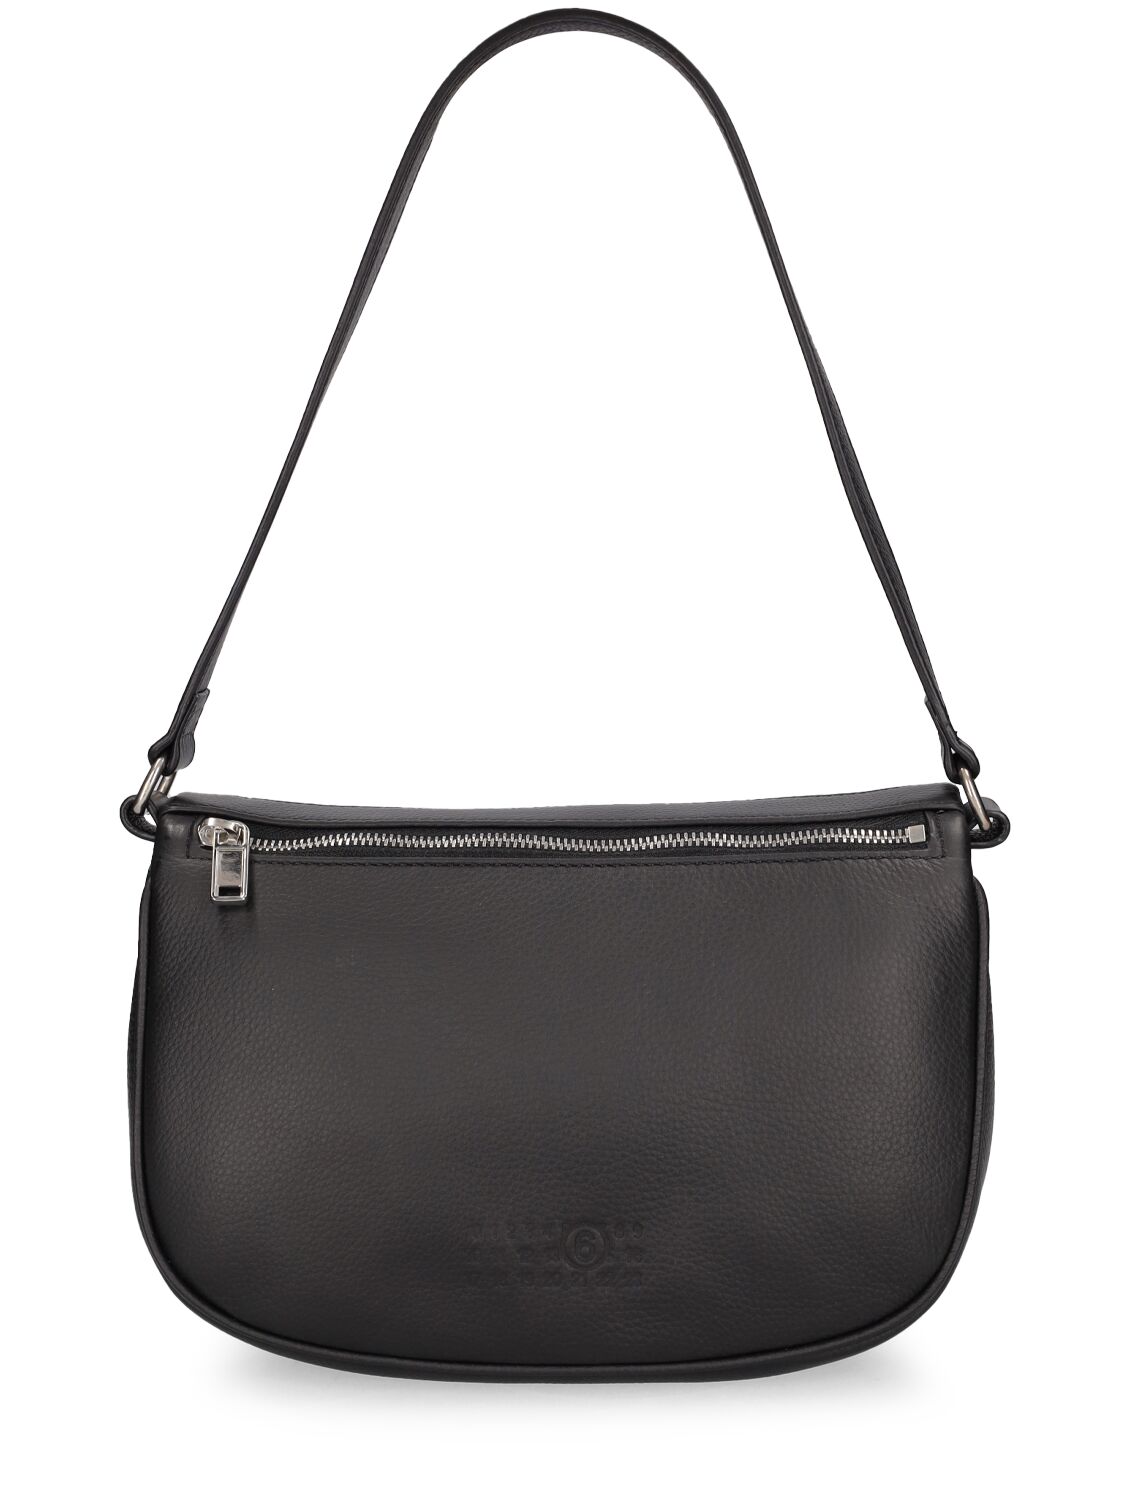 Mm6 Maison Margiela Double Slouchy Hobo Leather Bag In Black